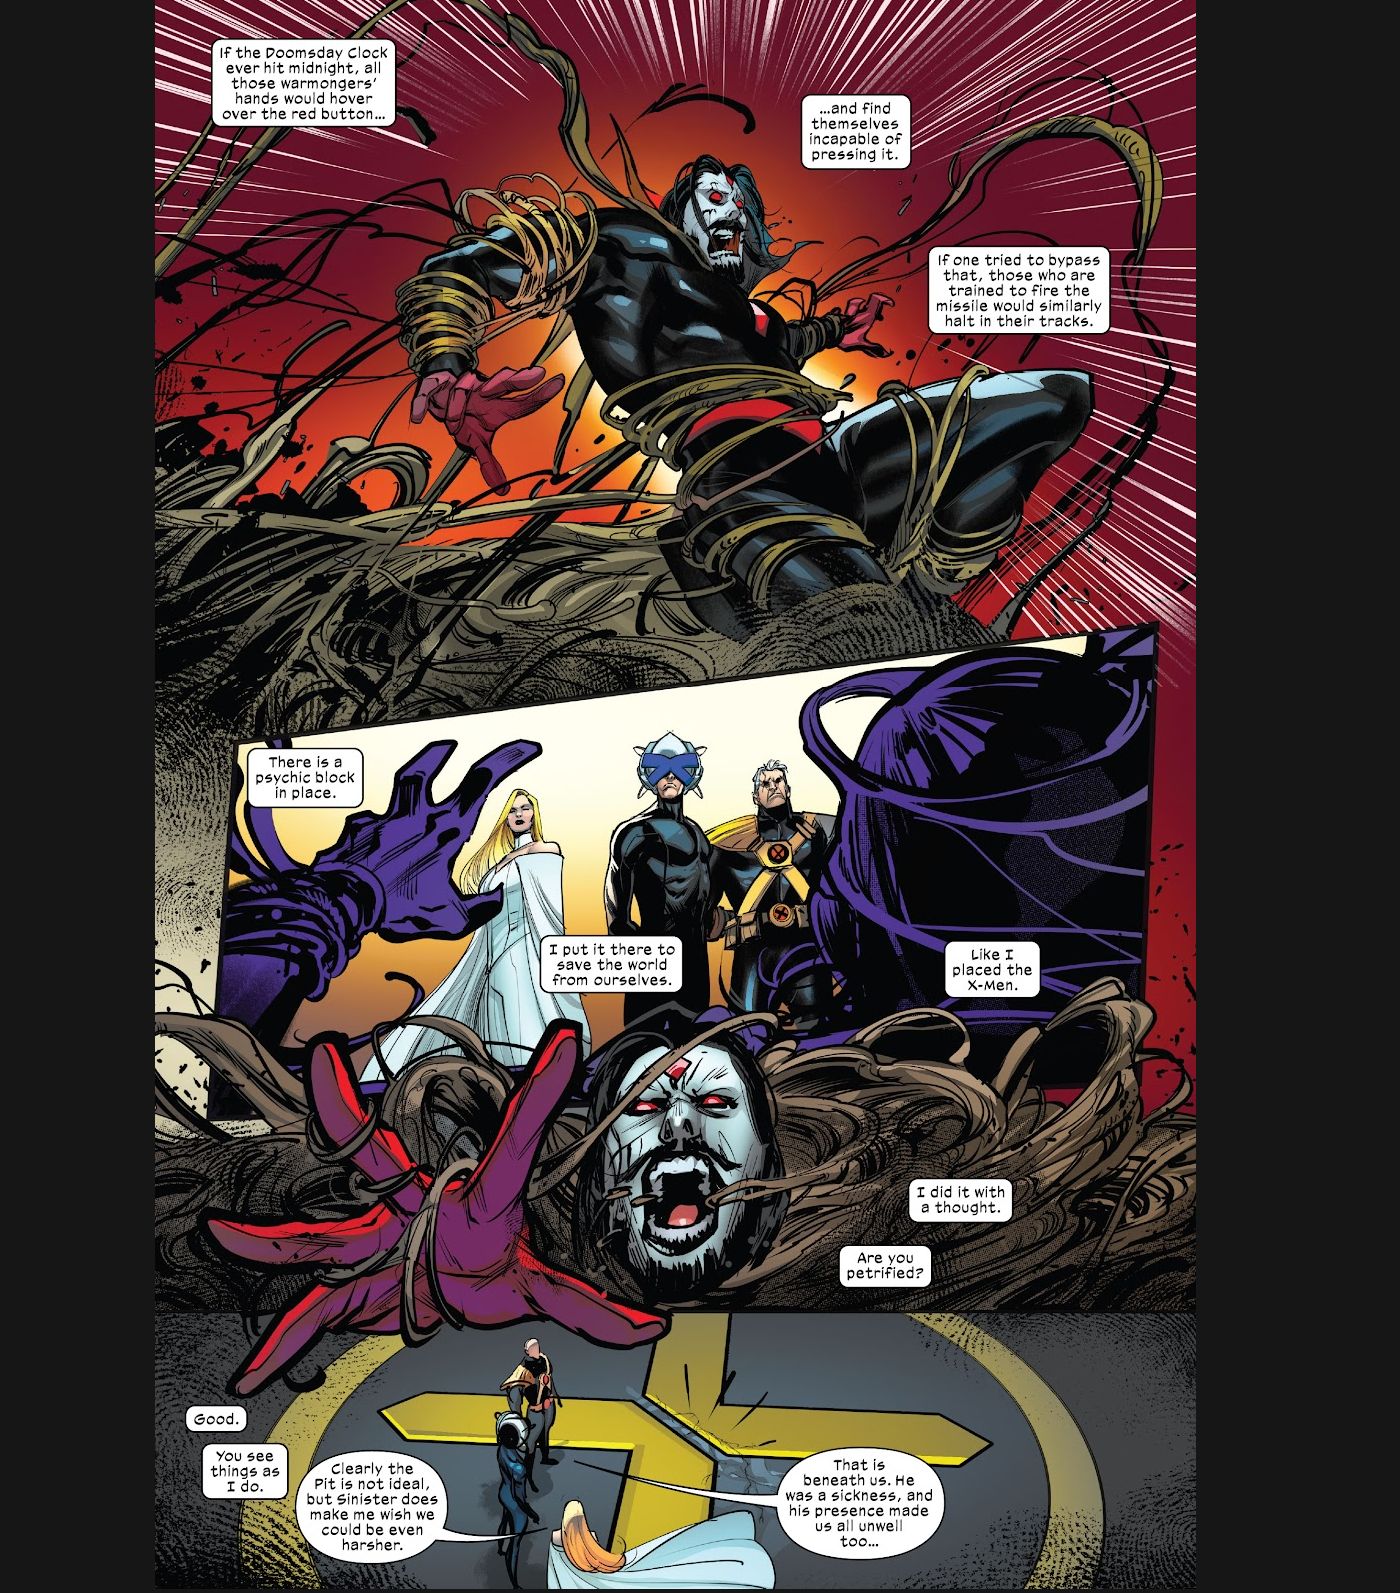 A narration of how Xavier psychically prevents global nuclear war. In the background, Mister Sinister is dragged into Krakoa's Pit.